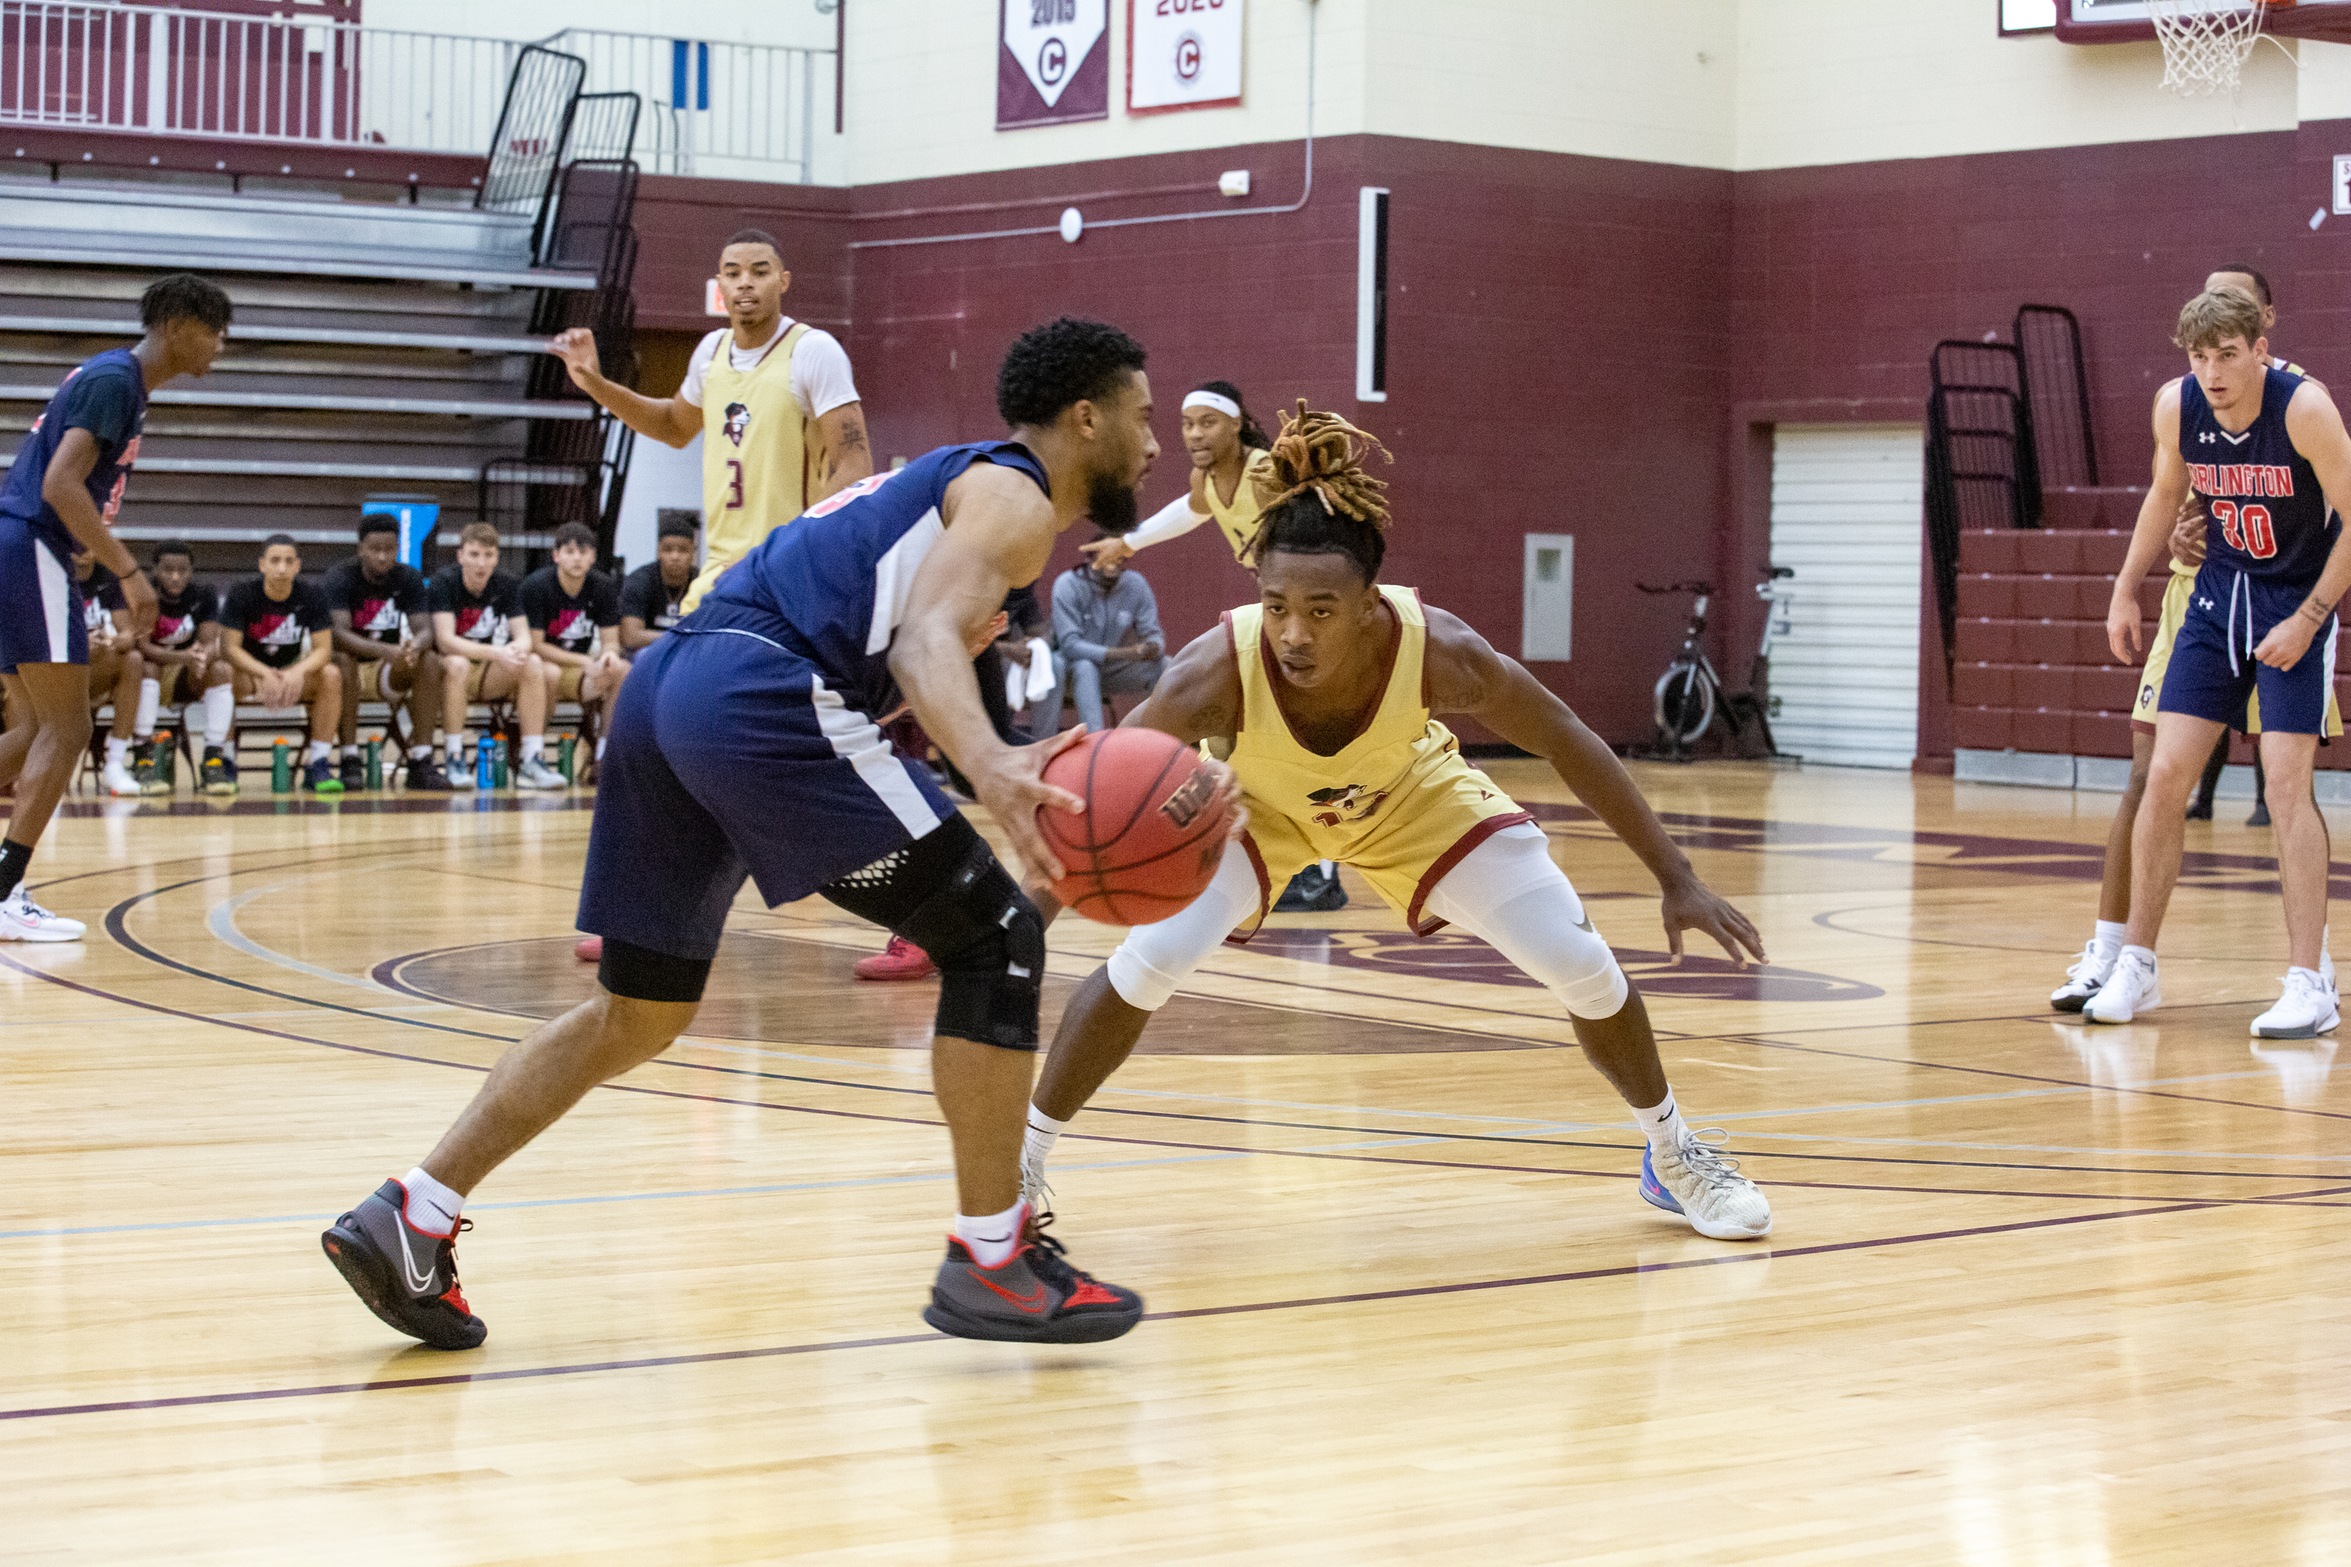 Gents Fall To St. Thomas On Sunday In Final Regular-Season Home Game